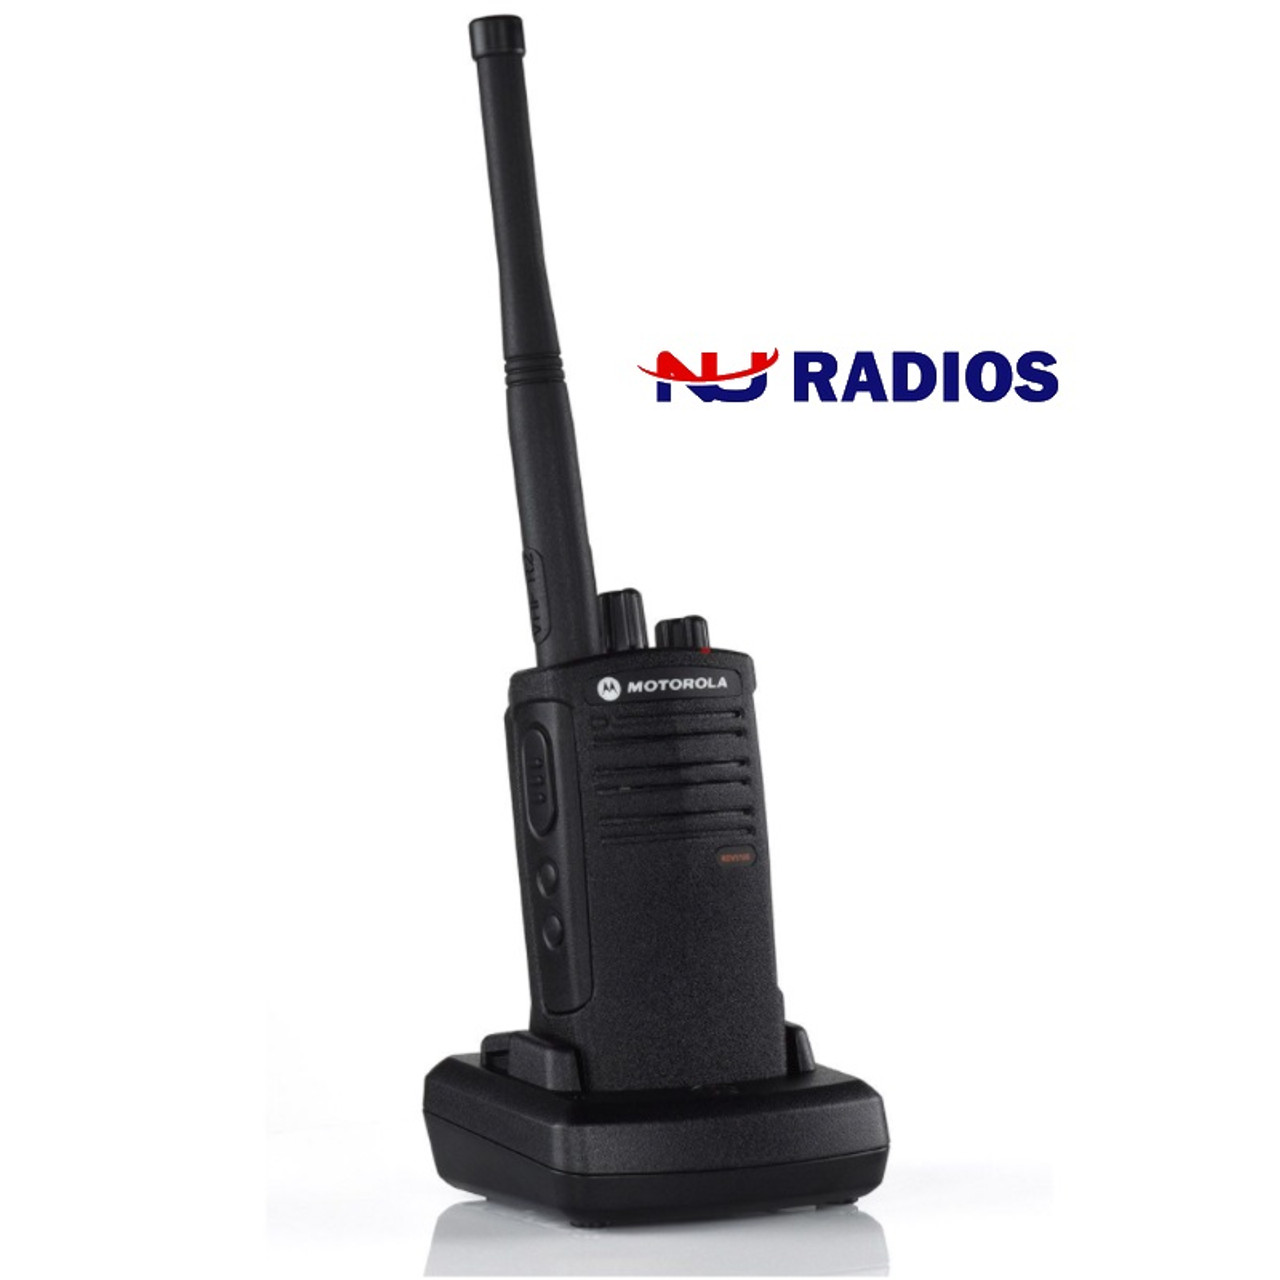 Pack of Motorola RDU4100 Business Two-Way Radios with 10 Channels   Watts (UHF) - 1